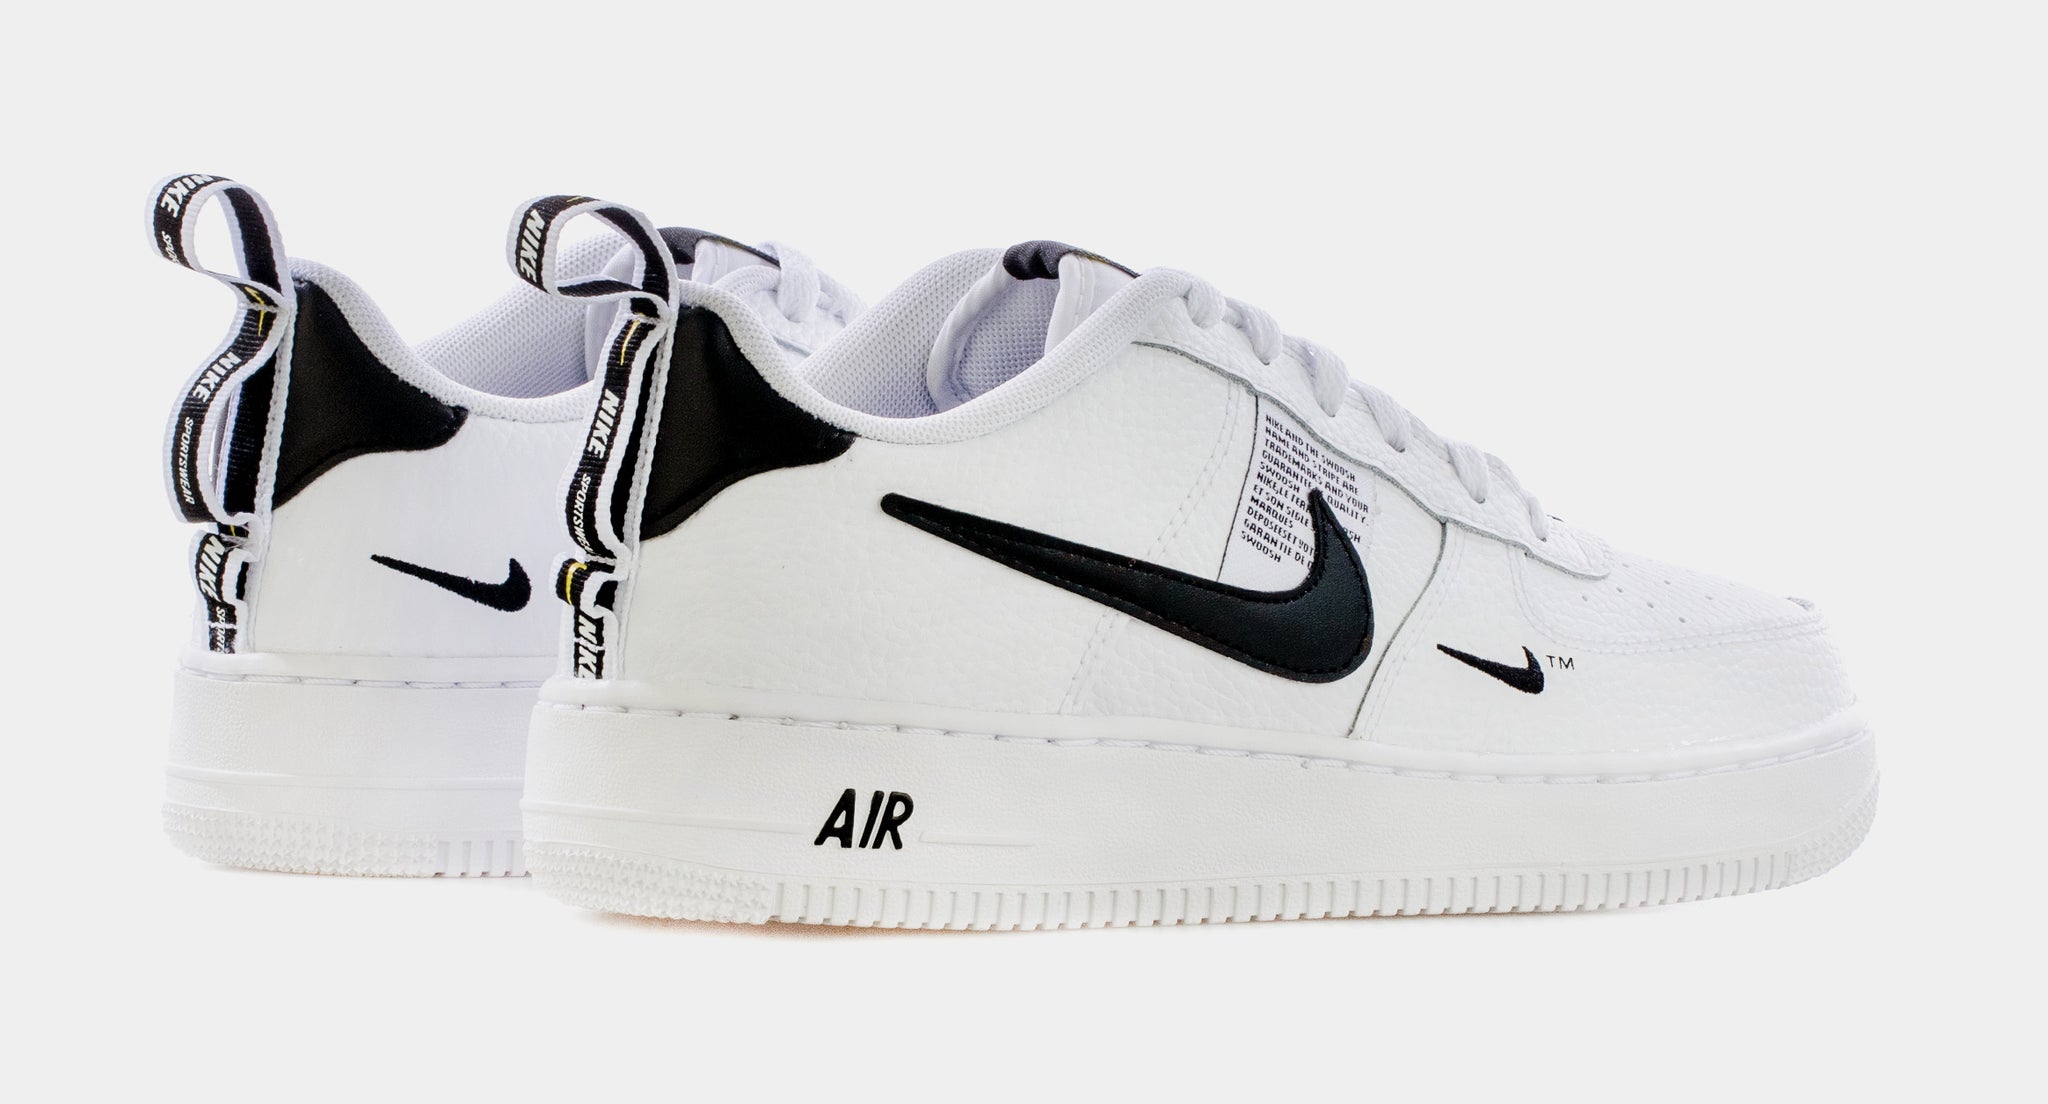 Nike Air Force 1 LV8 Utility Grade School Lifestyle Shoes White